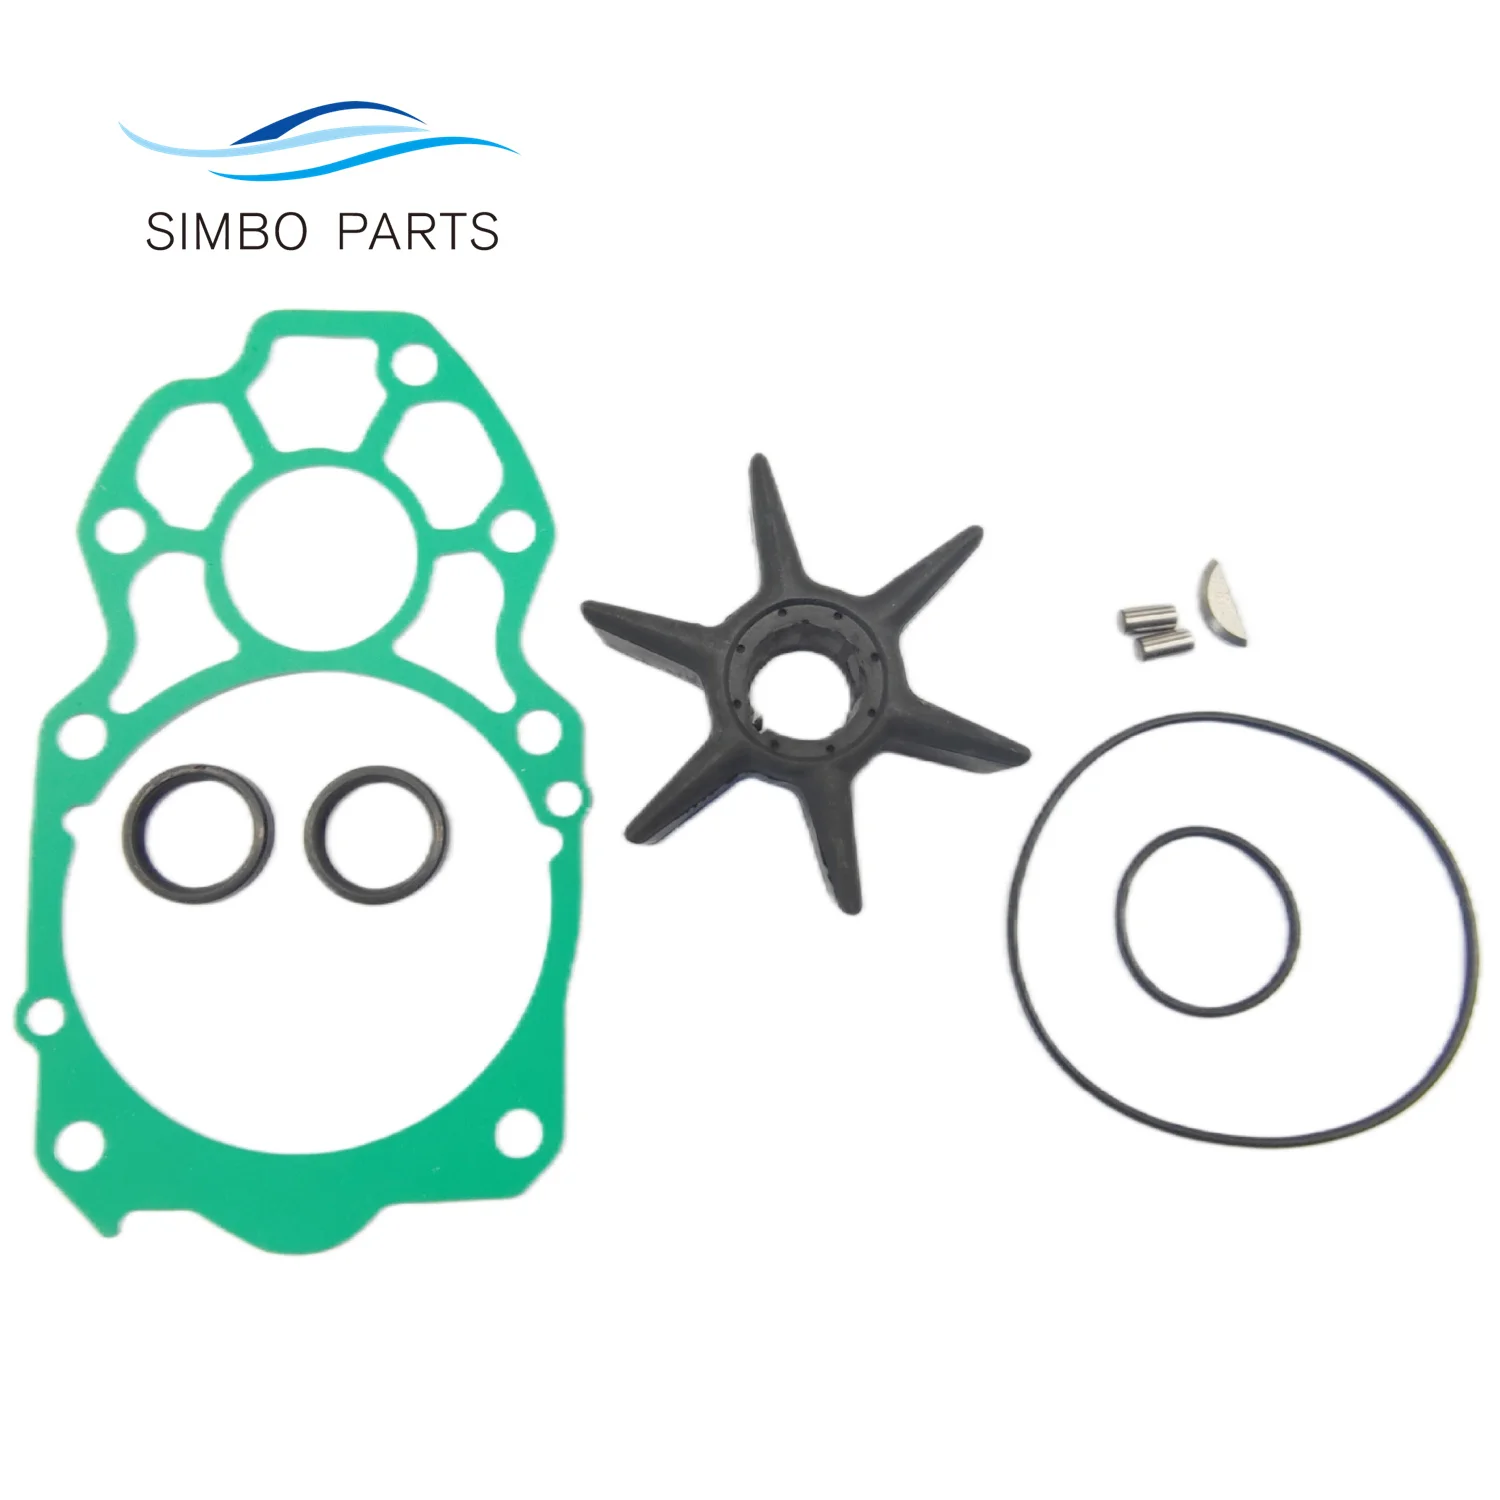 

Water Pump Impeller Kit For Yamaha Outboard 4 Stroke 225 250 300 350 hp 6CE-W0078-01 6CE-W0078-00 18-3470 18-3471